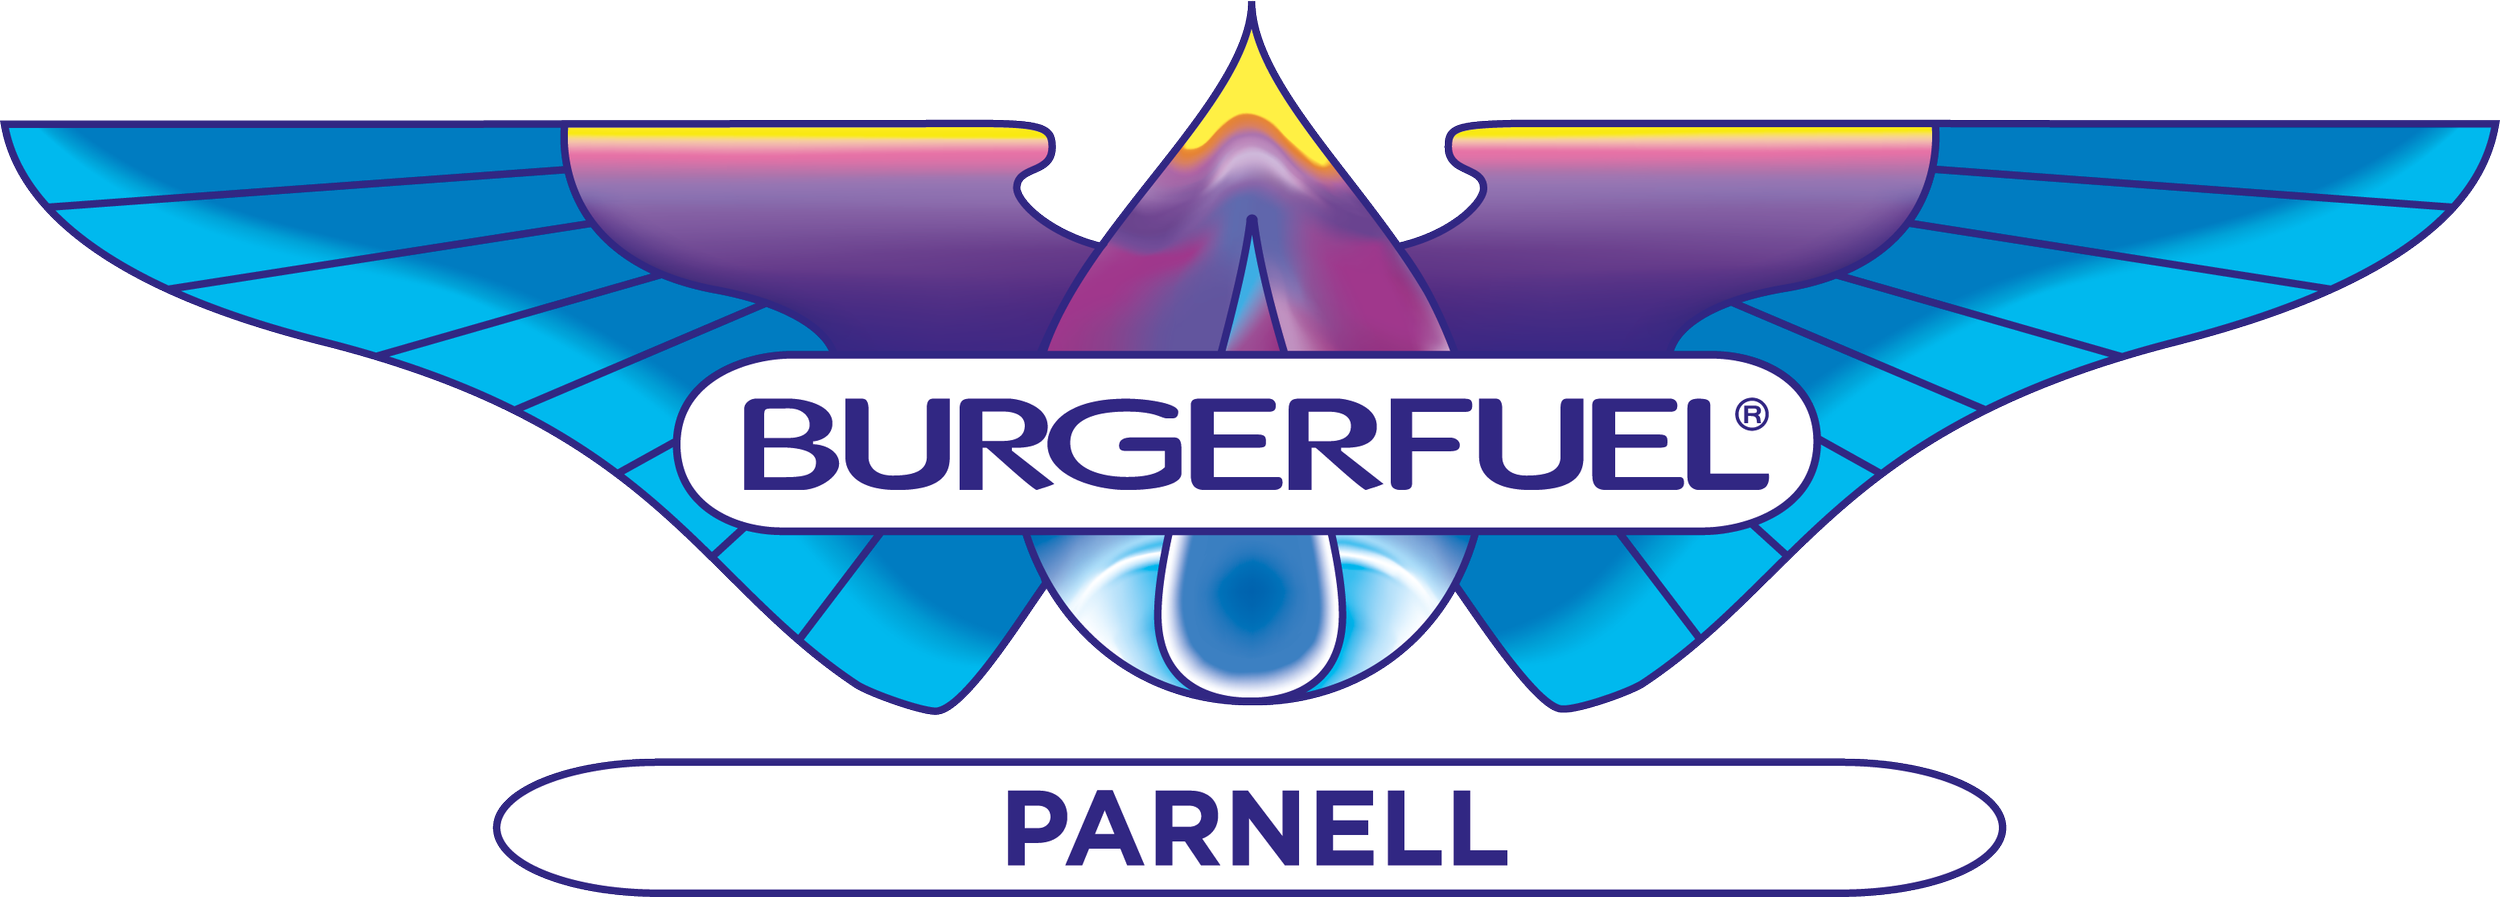 BurgerFuel Wings Parnell.png